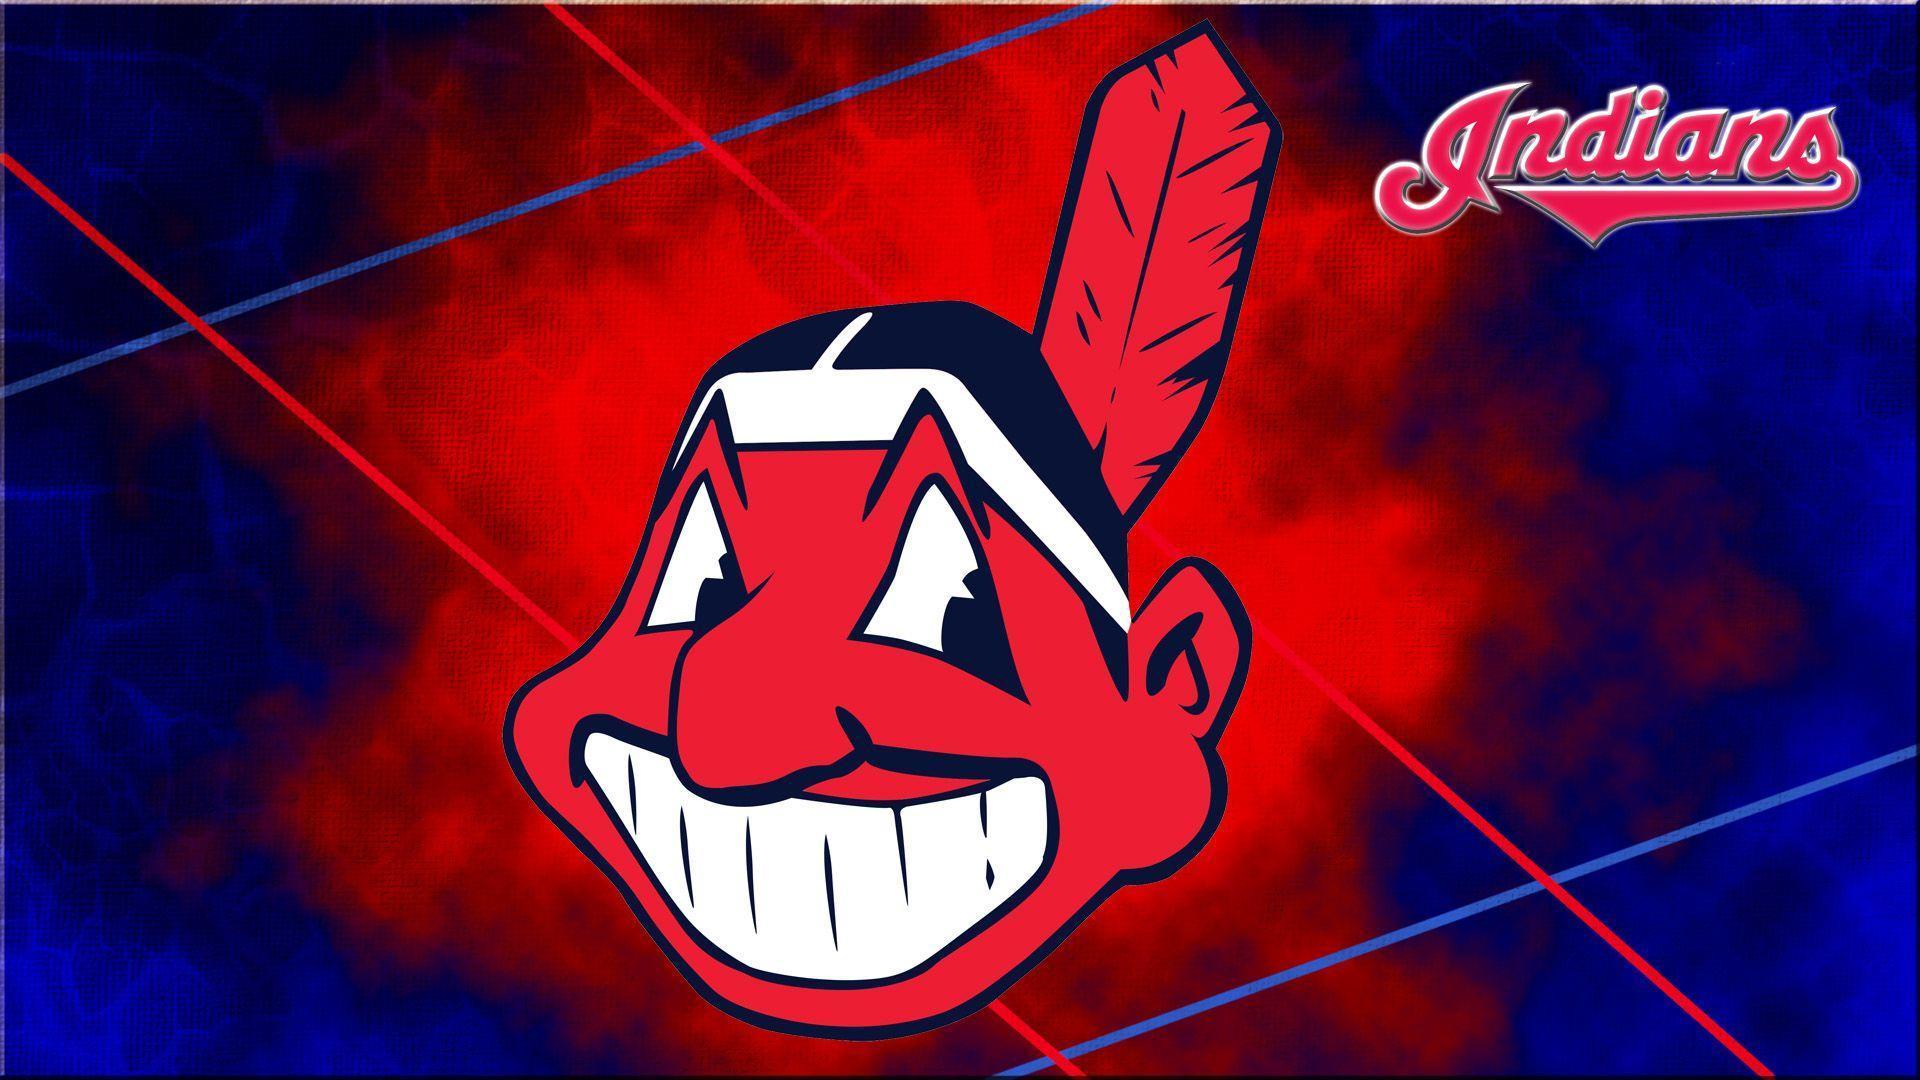 69+ Cleveland Indians HD